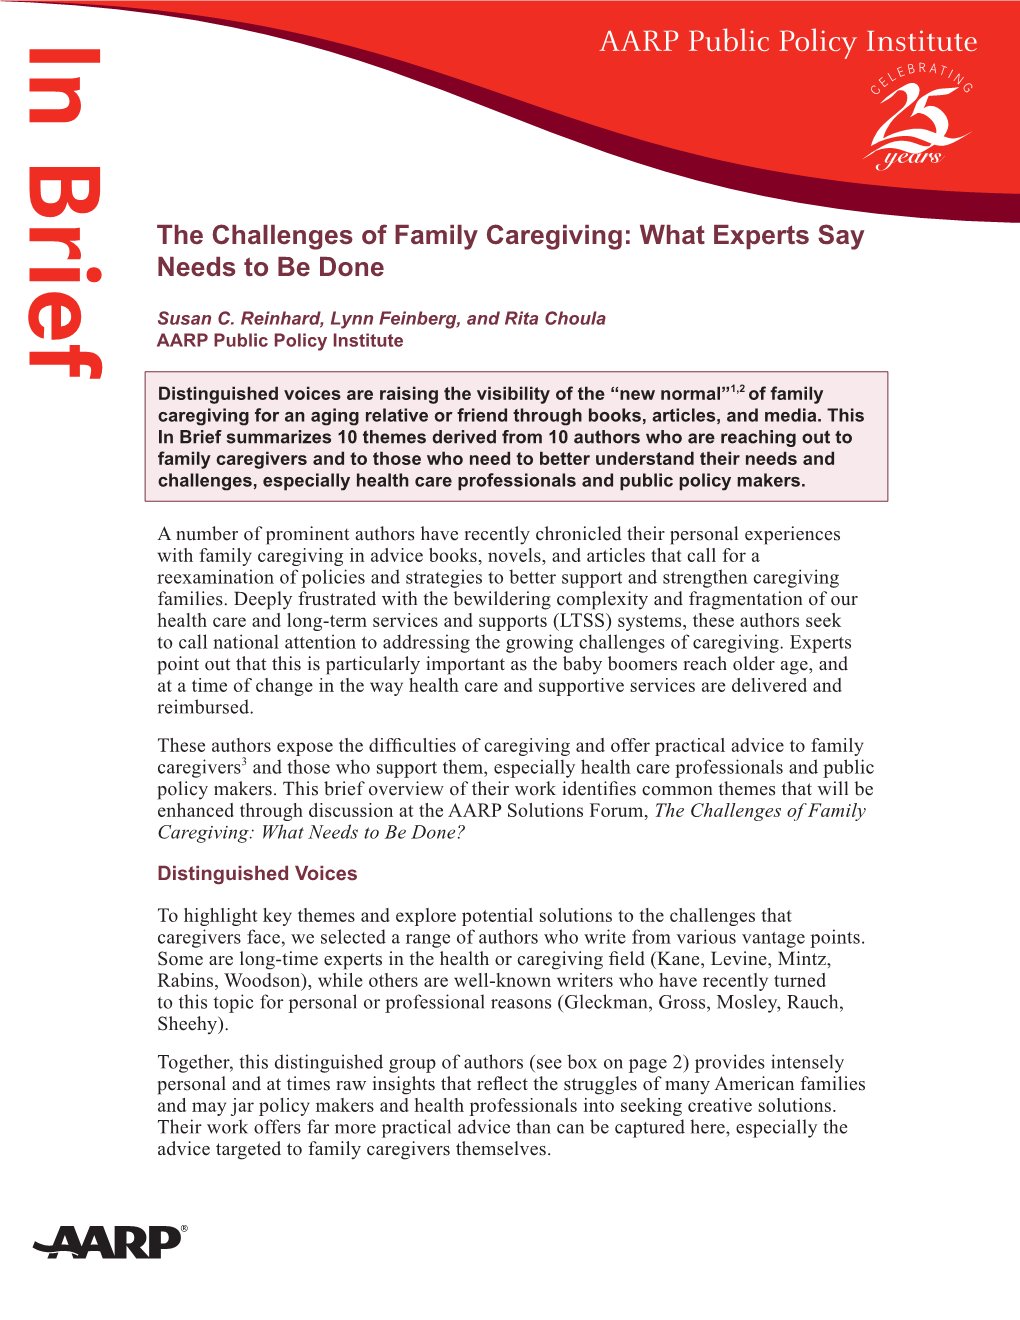 The Challenges of Family Caregiving: What Experts Say Needs to Be Done